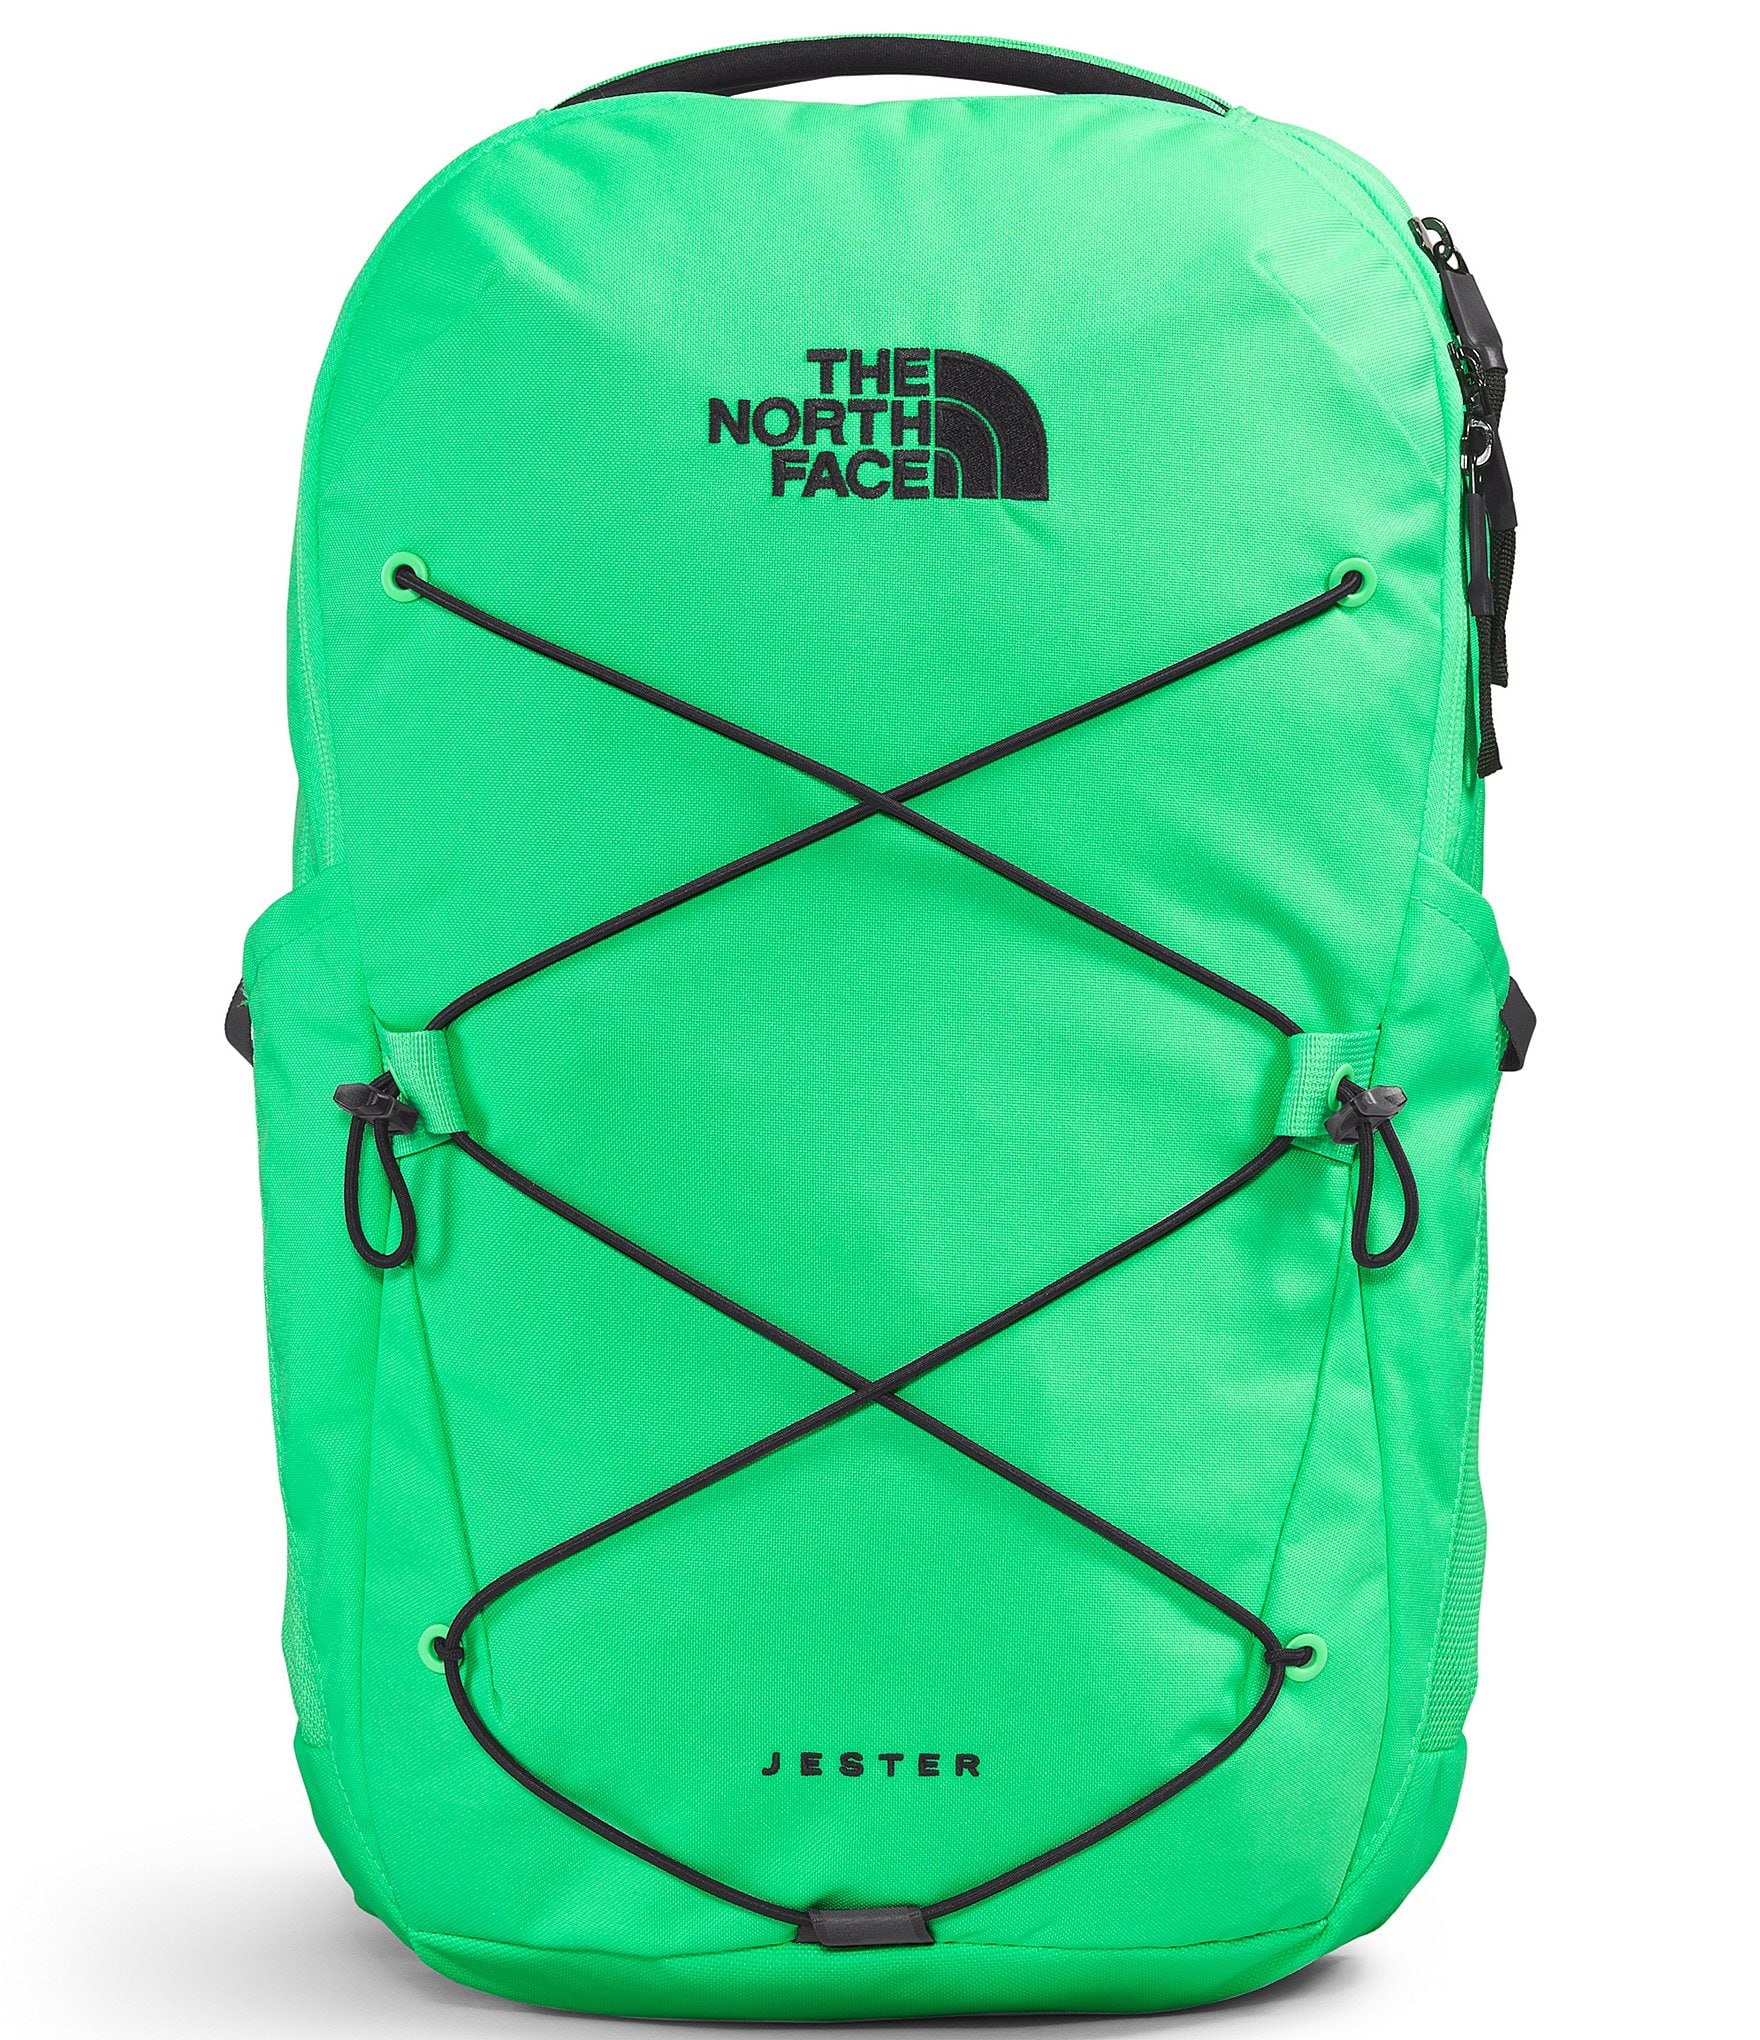 The North Face Jester Backpack | Dillard's